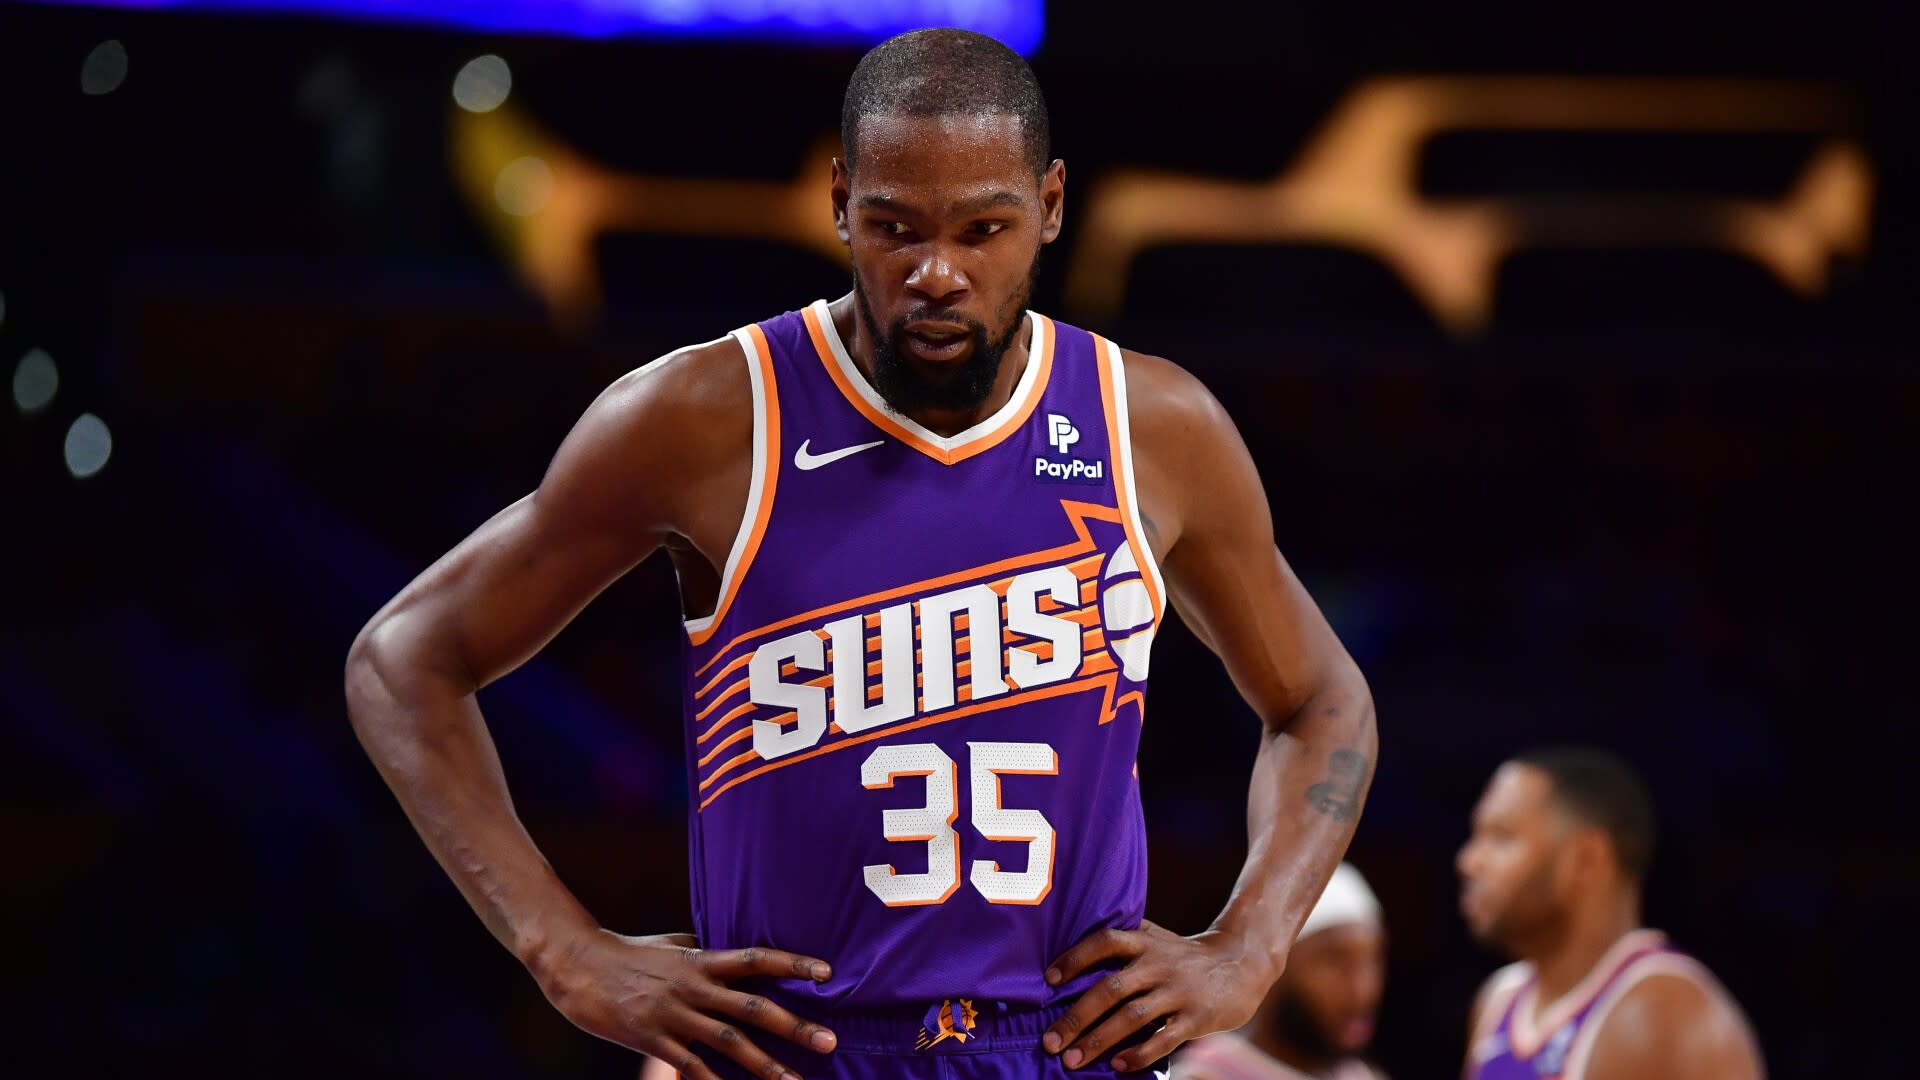 Kevin Durant passes Hakeem Olajuwon for 12th on NBA all-time scoring list